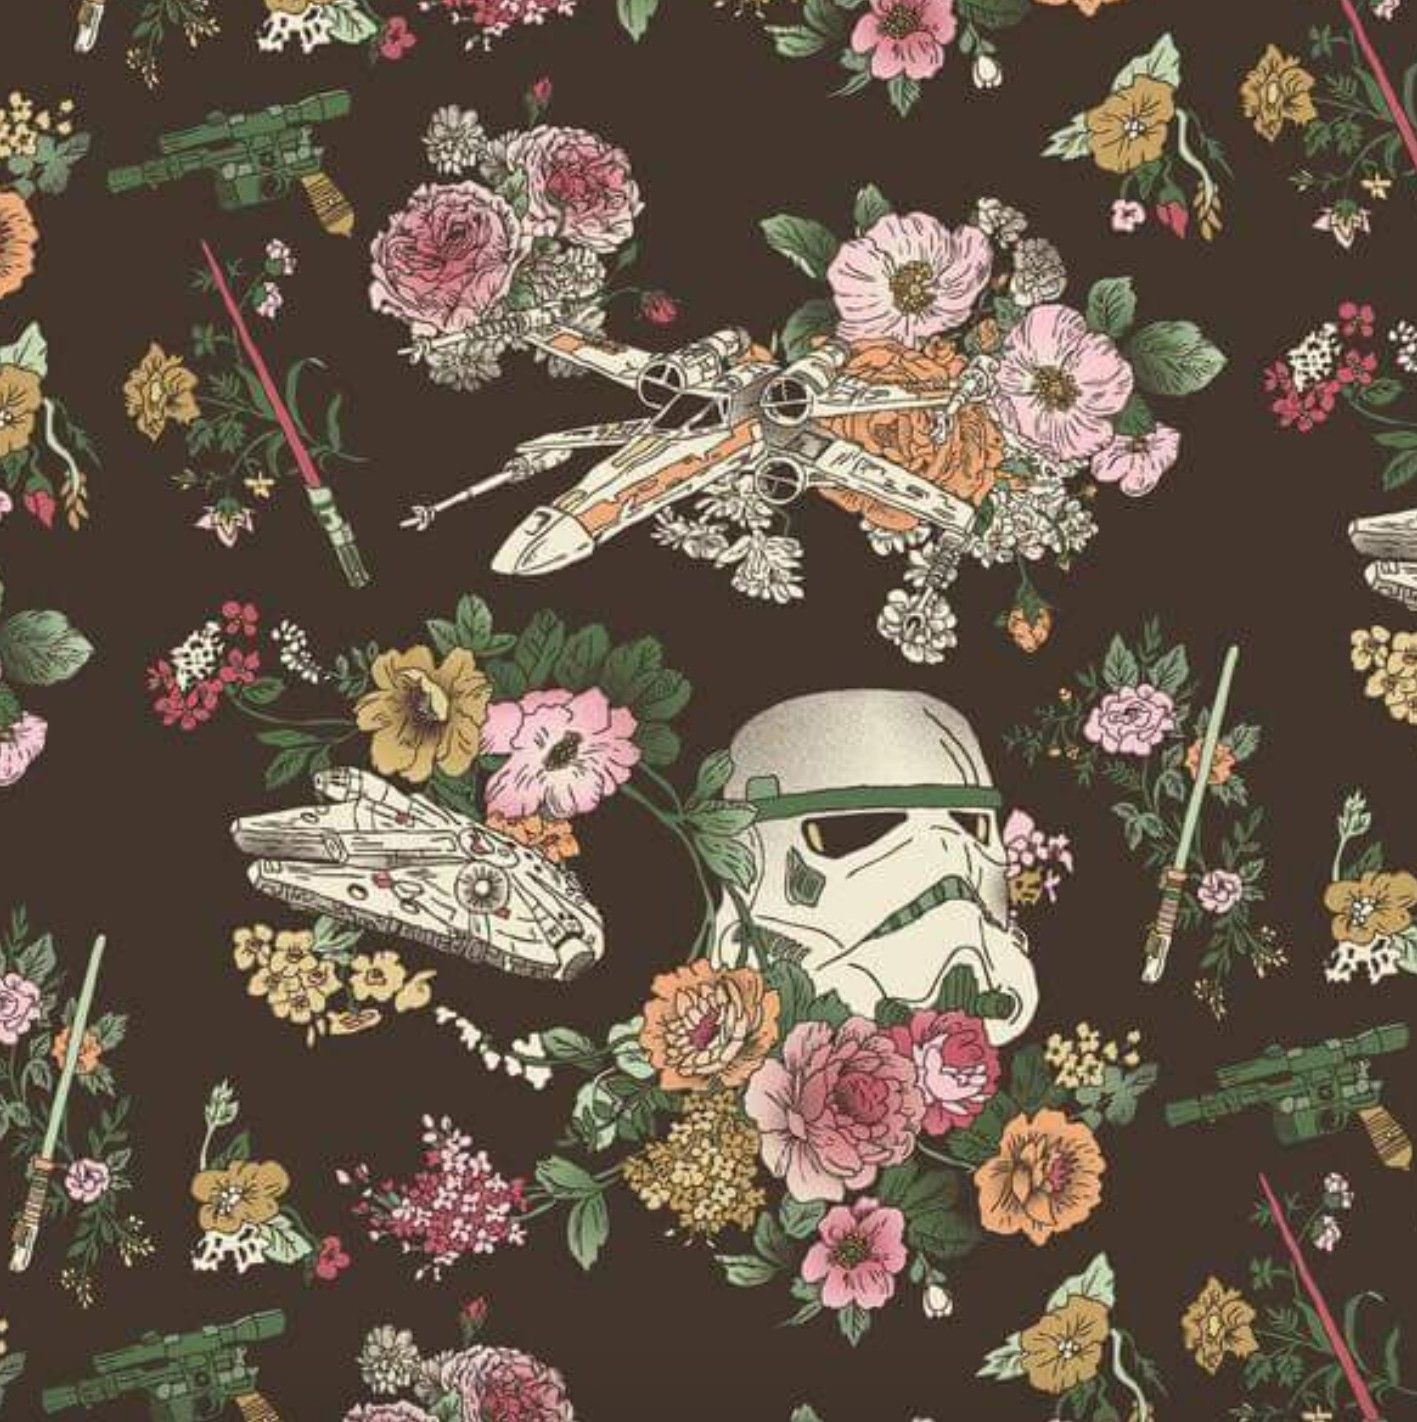 Floral Satr Wars Background Starwars Things In Star